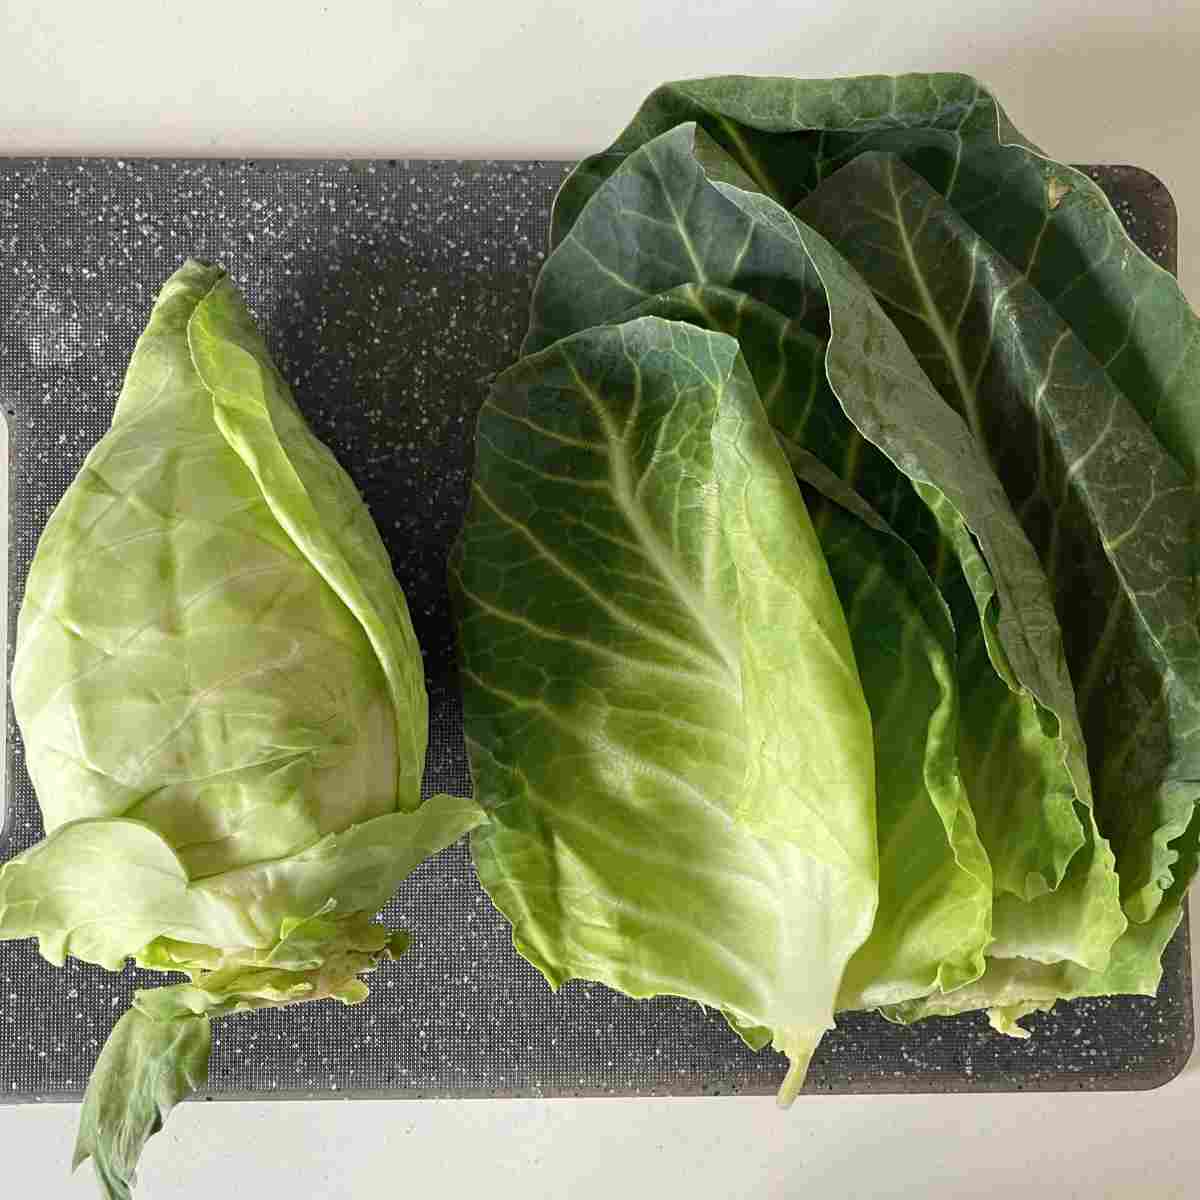 Outer cabbage leaves